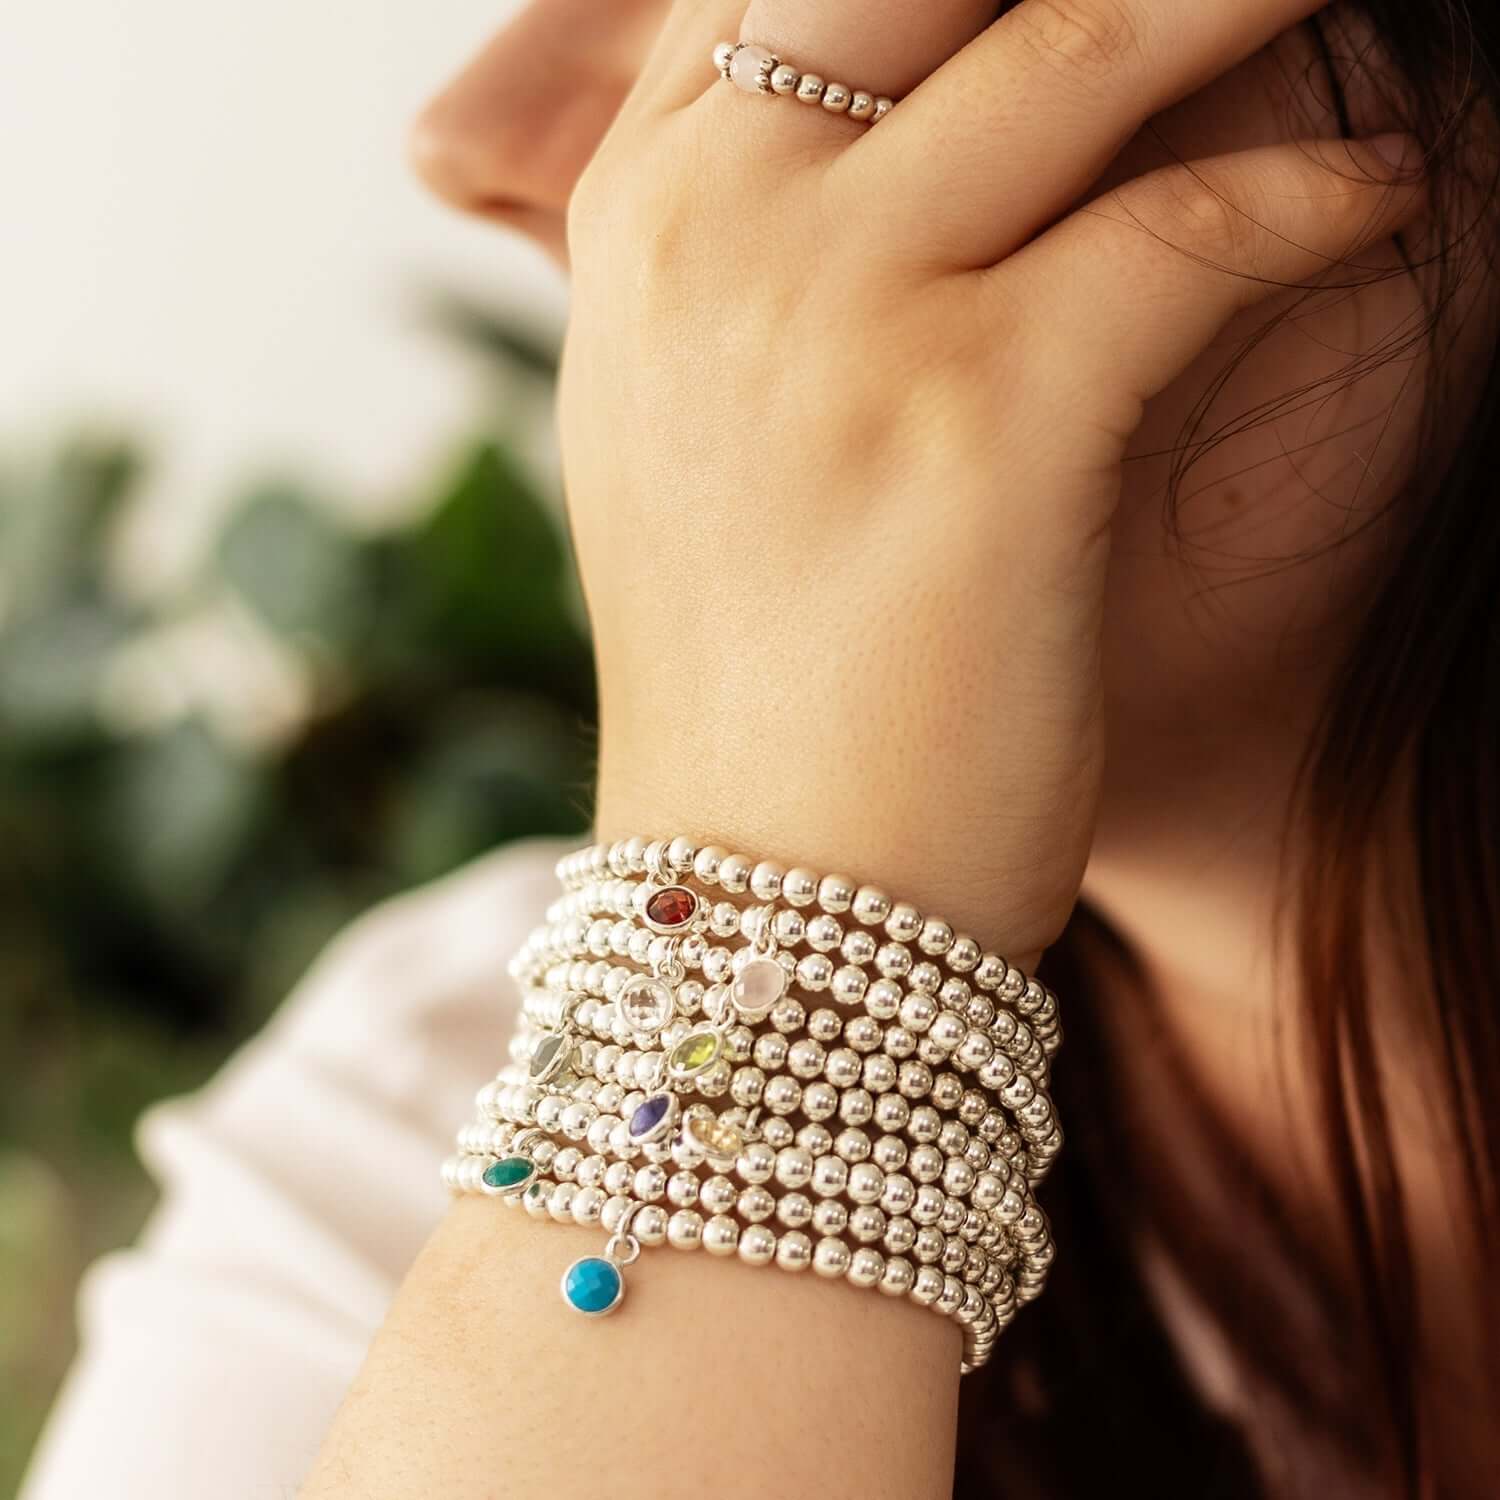 Close-up of a person with long hair, wearing multiple silver birthstone bracelets adorned with colorful charms on their wrist. The person has their hand lifted to their face, showing a silver beaded ring. A blurred green plant is in the background.